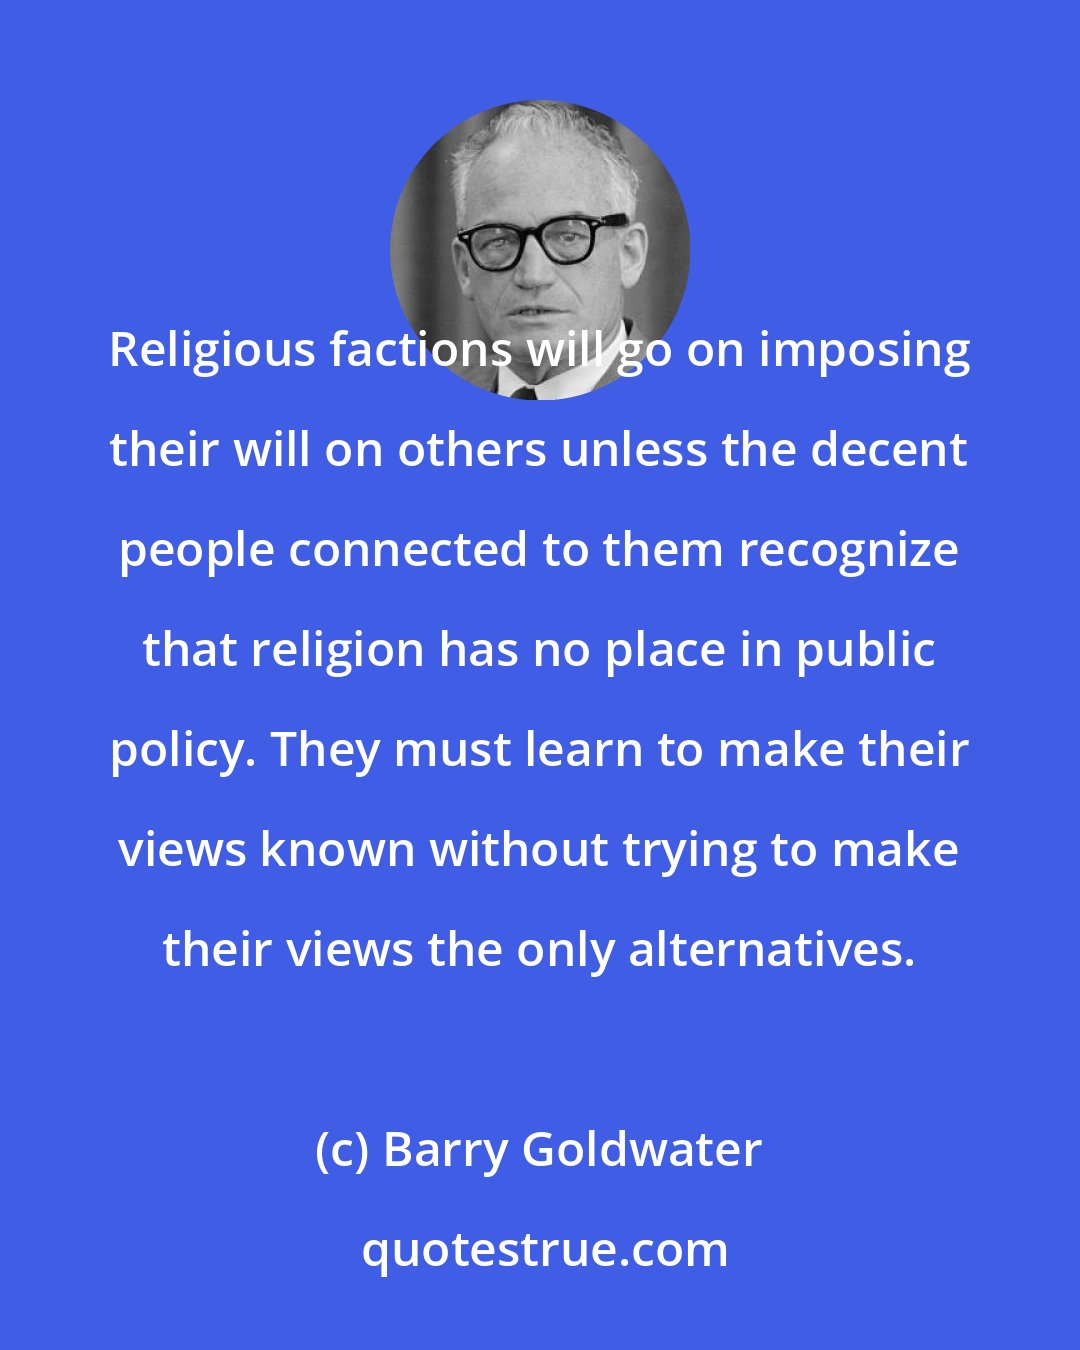 Barry Goldwater: Religious factions will go on imposing their will on others unless the decent people connected to them recognize that religion has no place in public policy. They must learn to make their views known without trying to make their views the only alternatives.